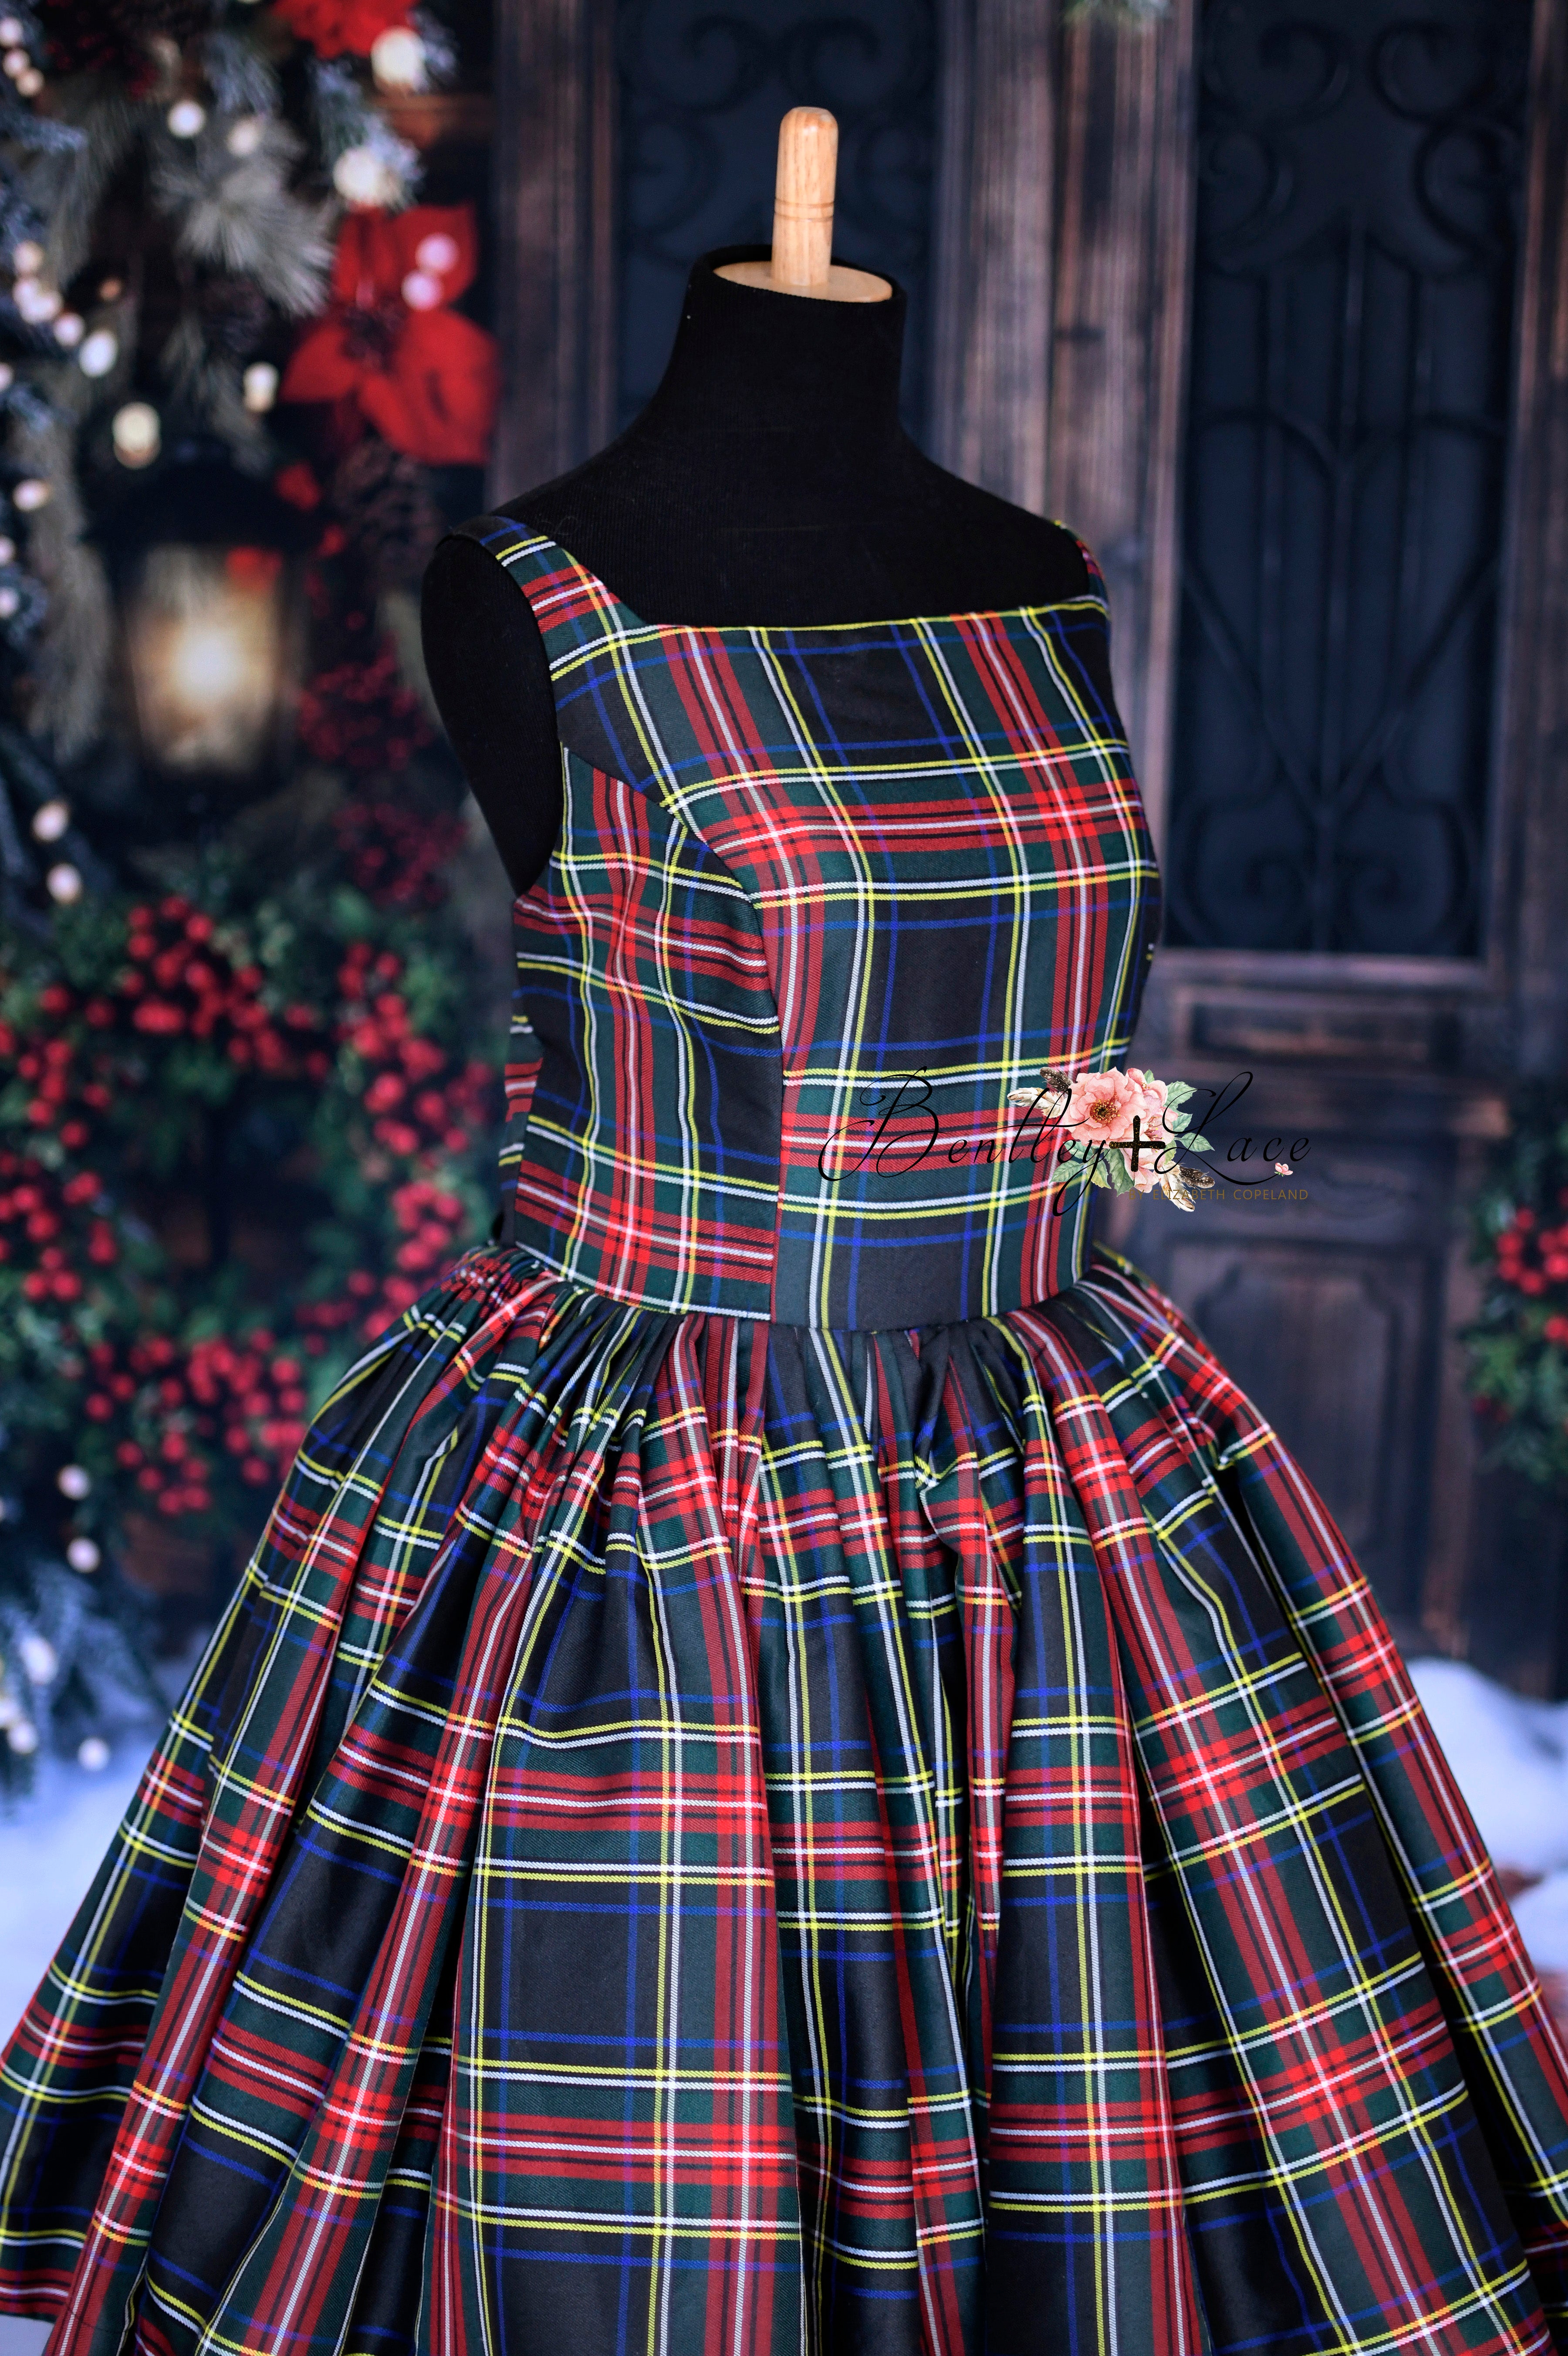 Couture gown rental: "Darling Plaid" Adult Short / Tea Length Dress ( Adult 8-12)